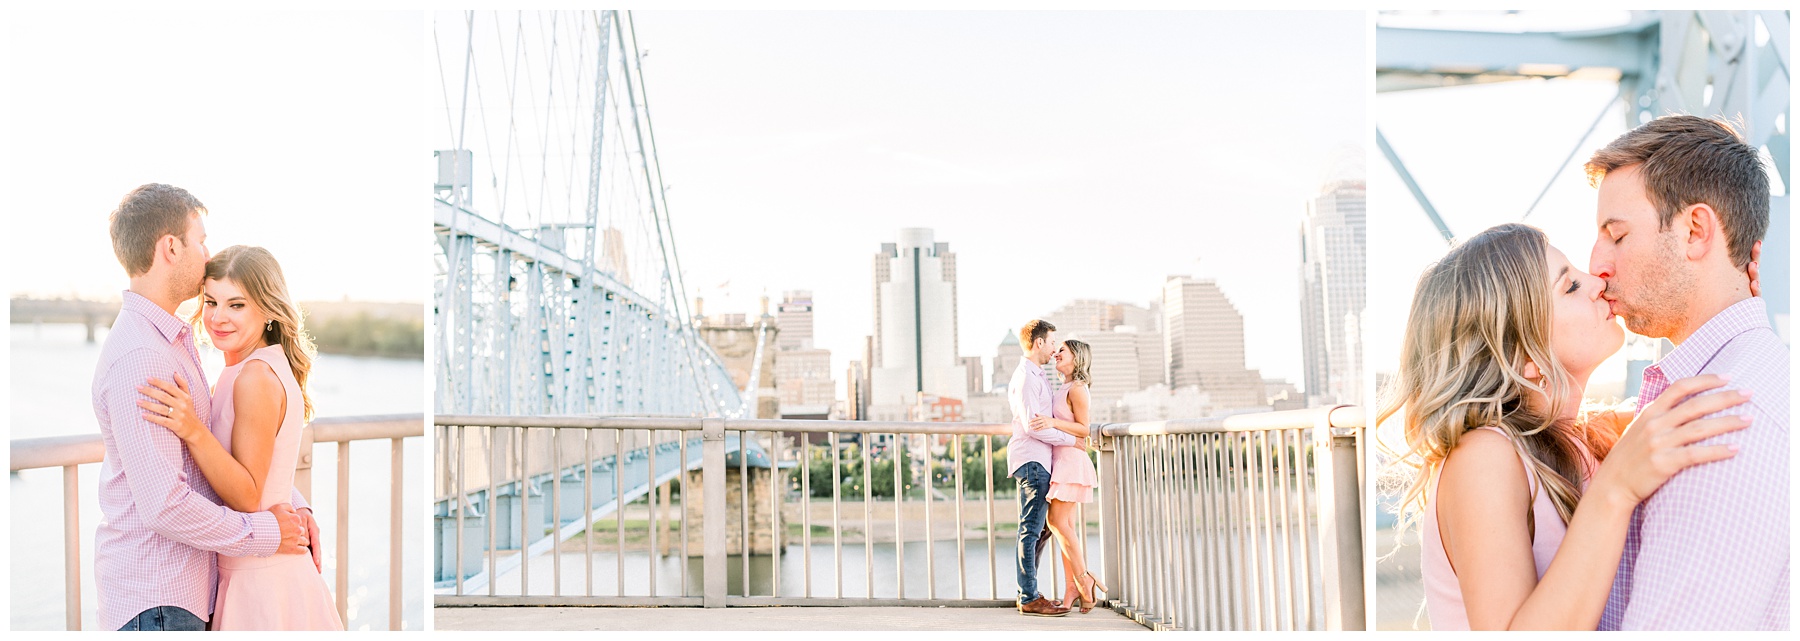 Smale Riverfront Park Engagement Session in downtown Cincinnati OH